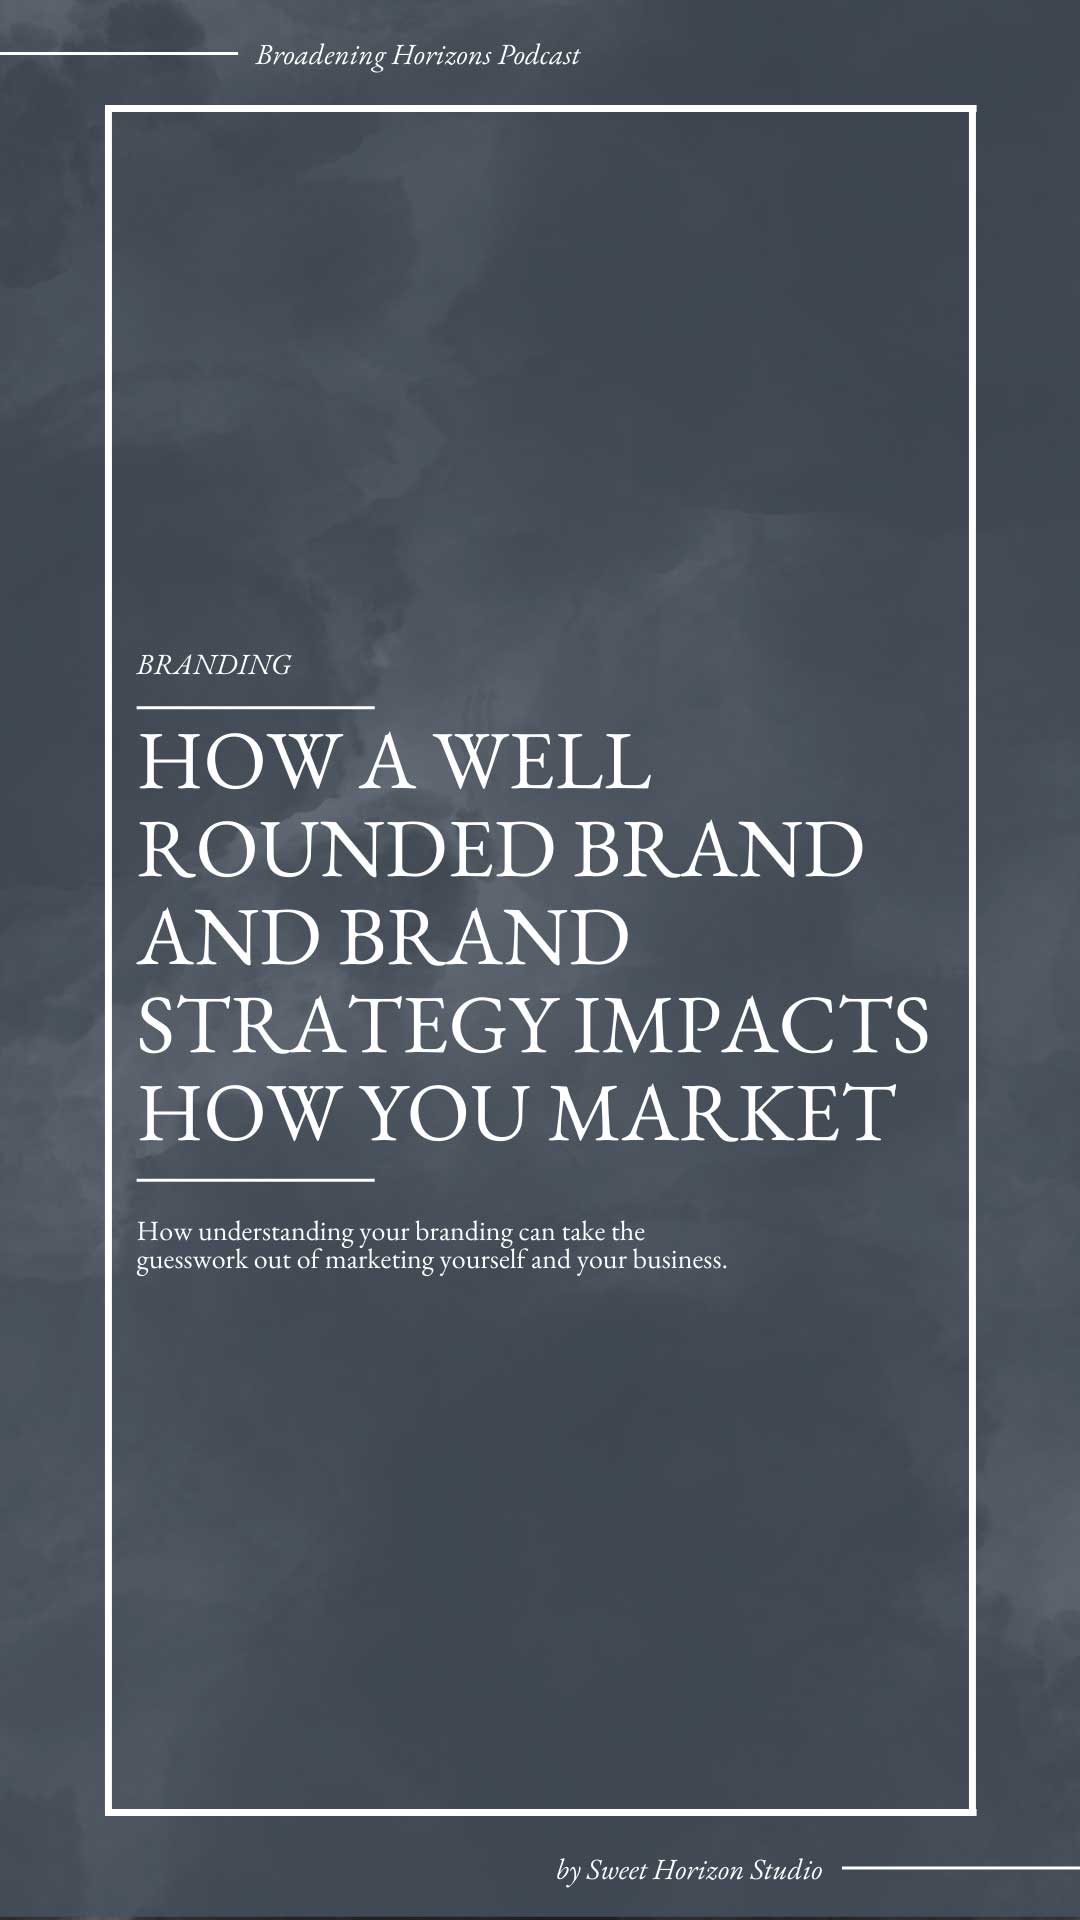 How a Well Rounded Brand and Brand Strategy Impacts How You Market from www.sweethorizonblog.com